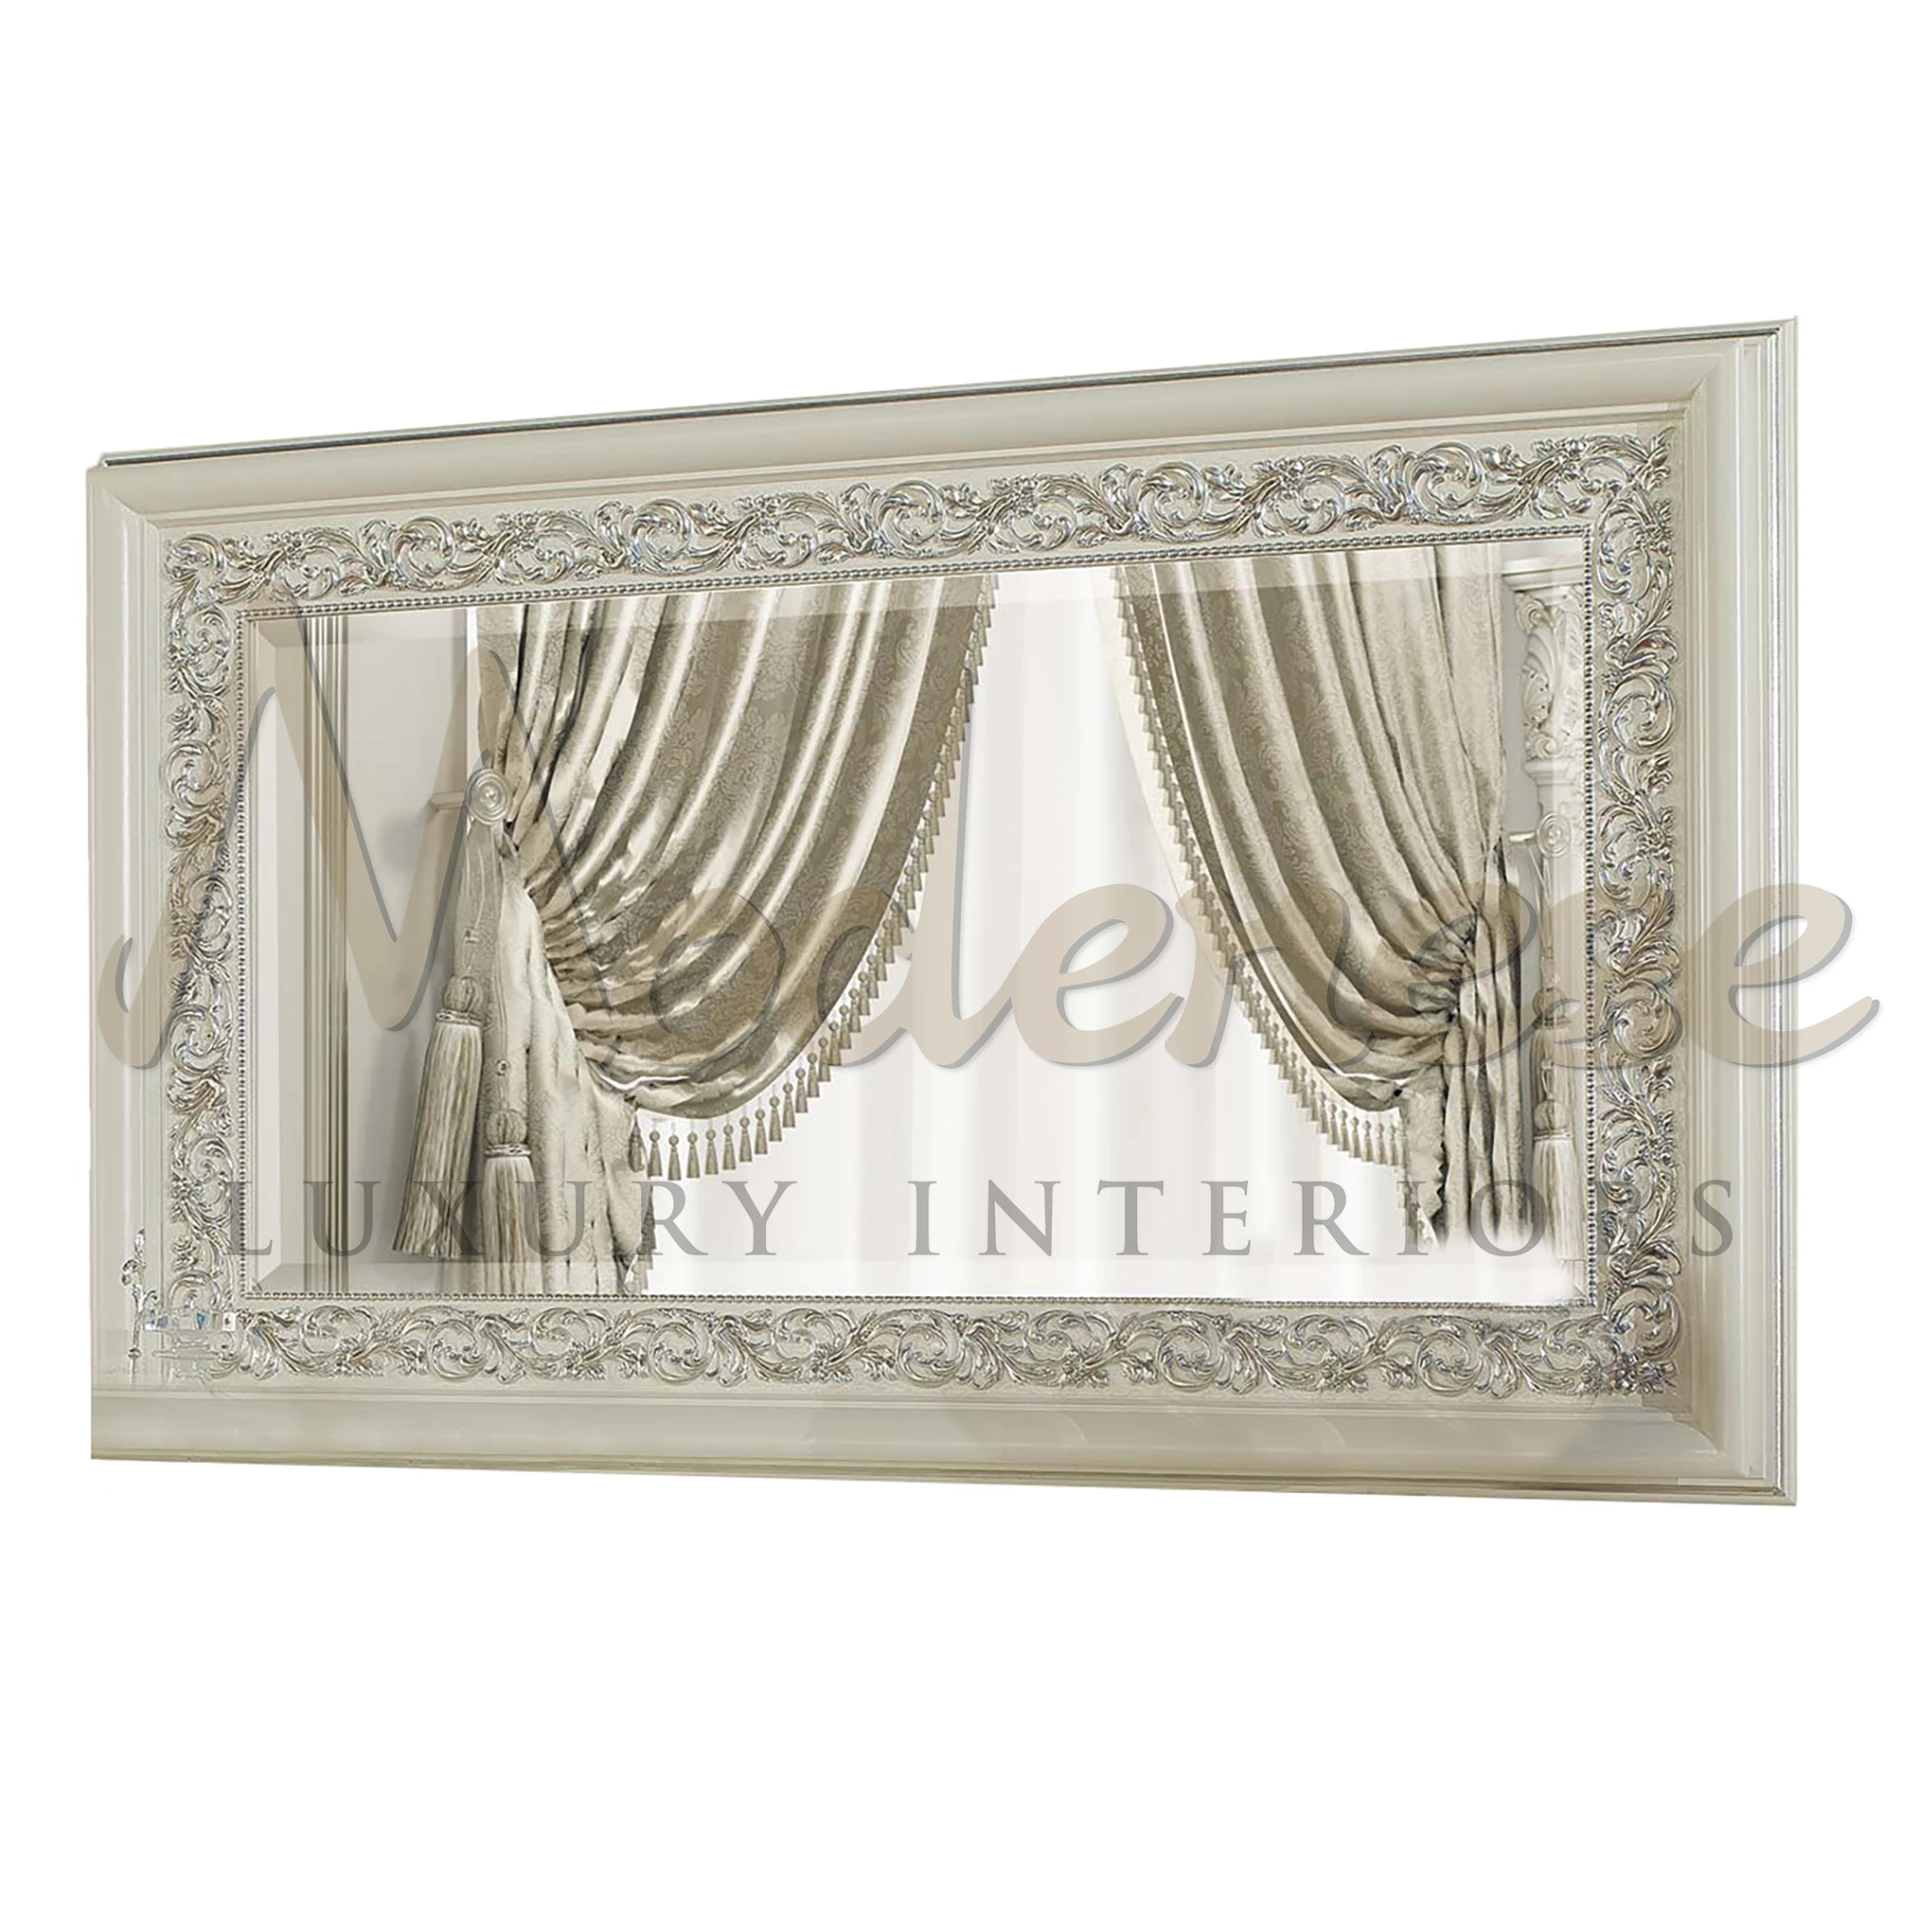 Impressive frame mirror with gorgeous design, handcrafted in Italy, a testament to classic luxury and style.